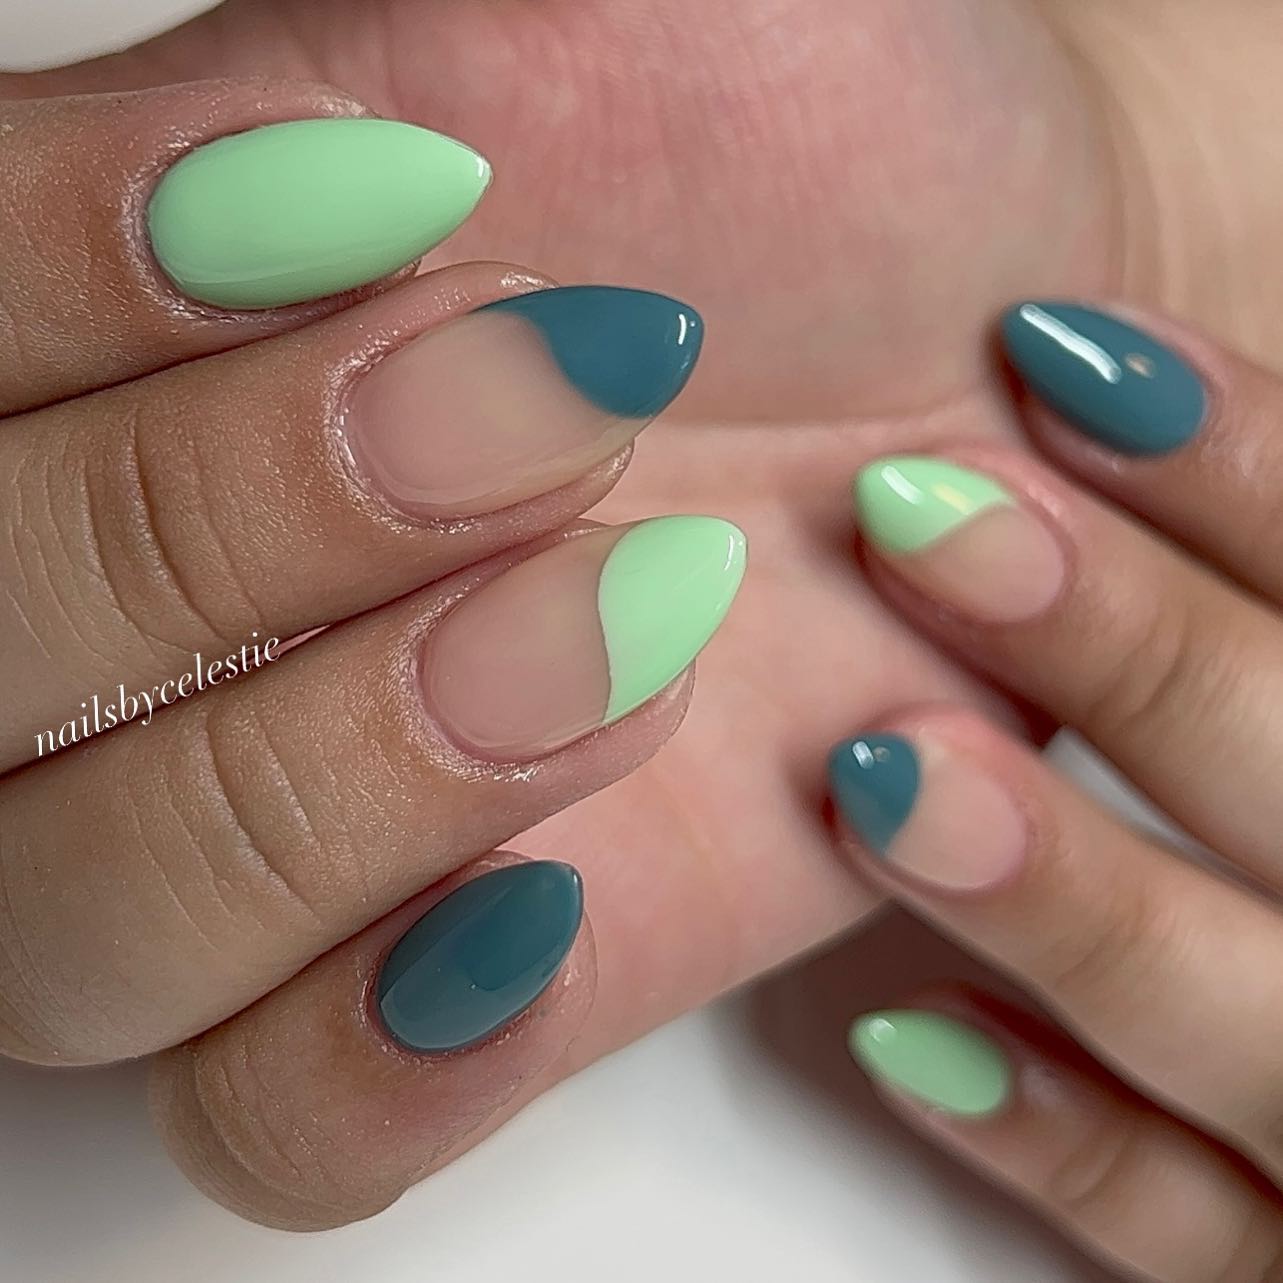 A pop of green with a subtle grey hue seems like your best go-to move. Try out these nails if you’re a fan of nail art and geometrical shapes.